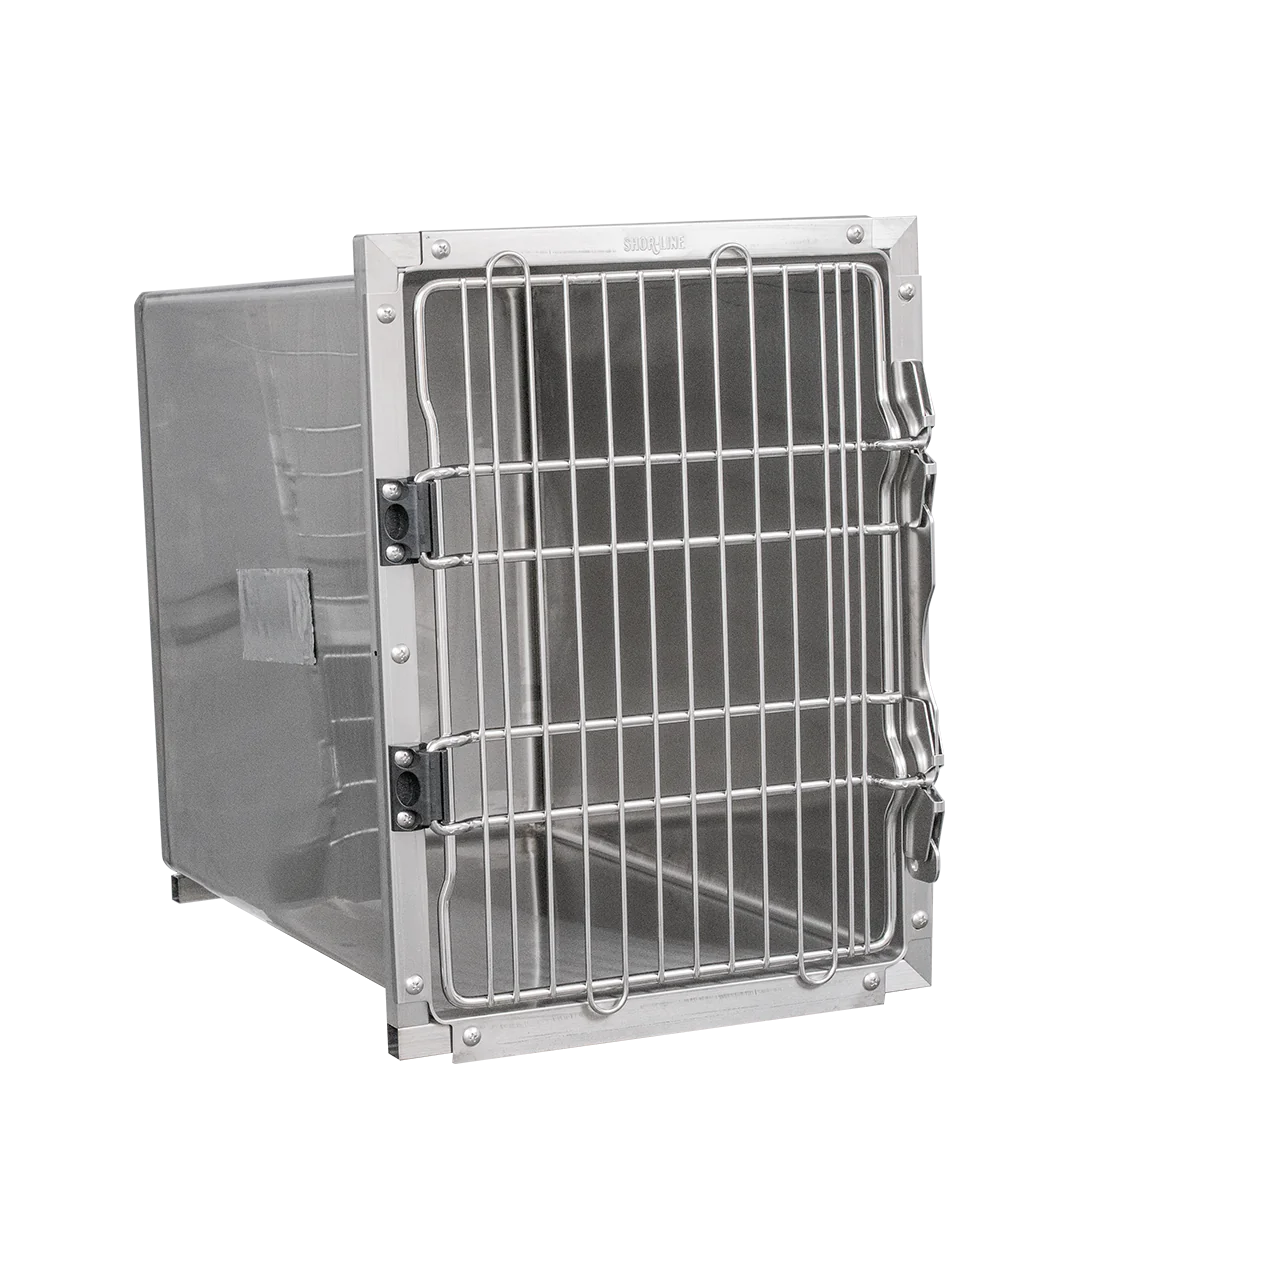 Shor-line stainless steel single cage